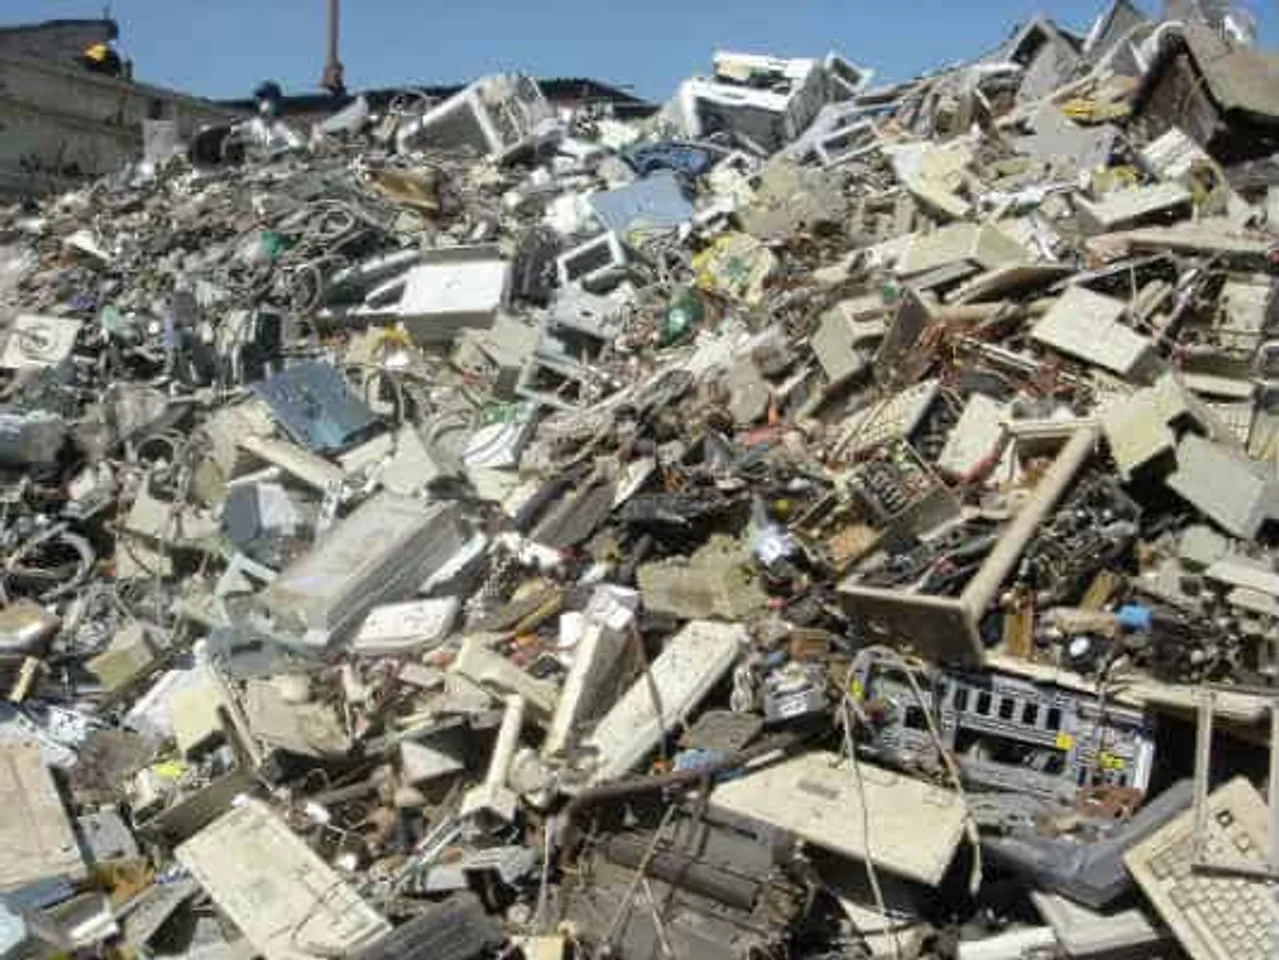 producer of e waste in world